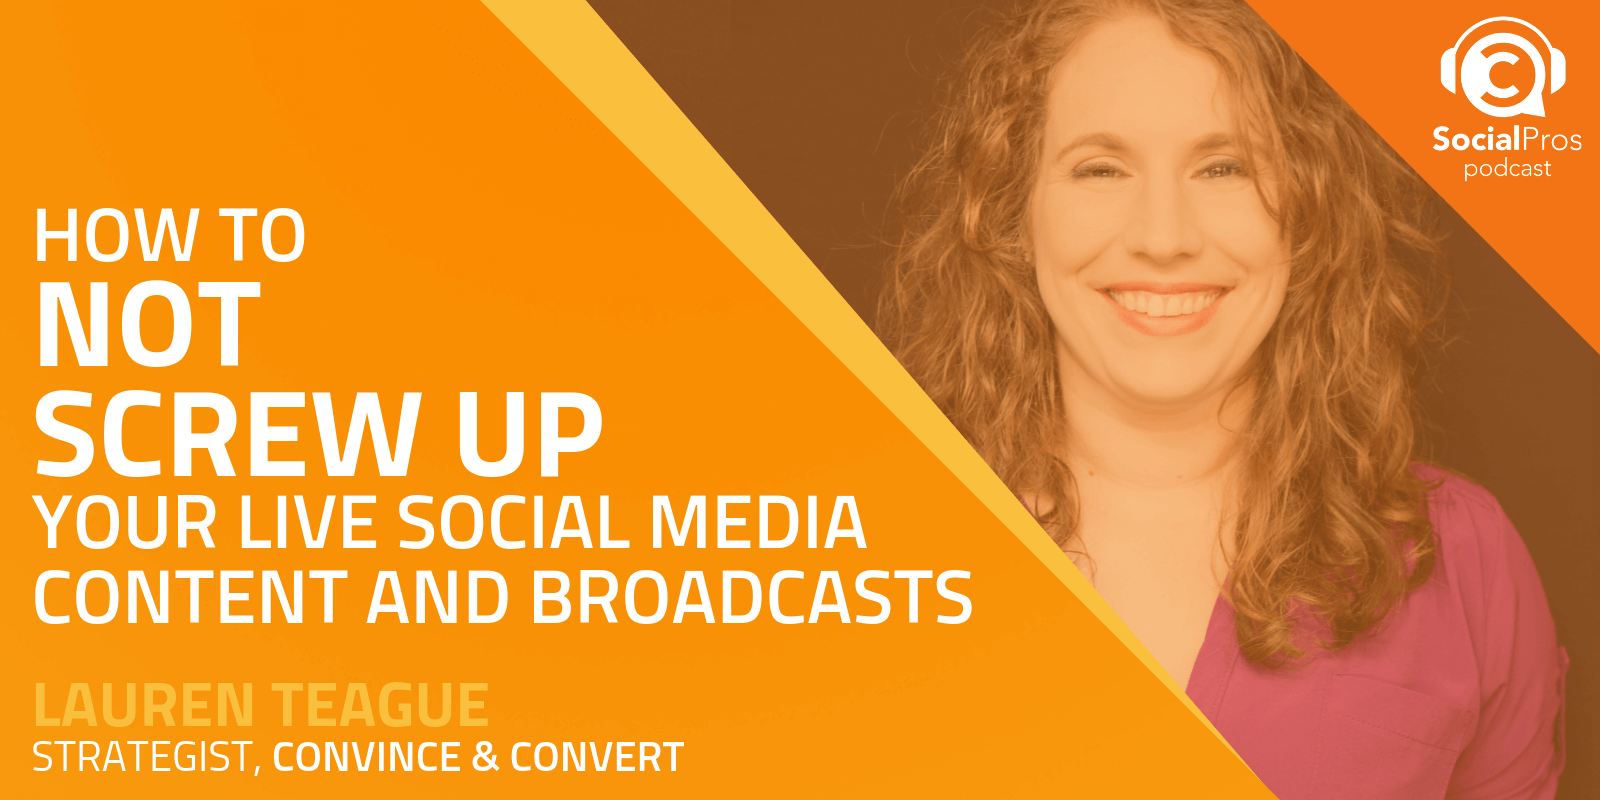 How to Not Screw Up Your Live Social Media Content and Broadcasts